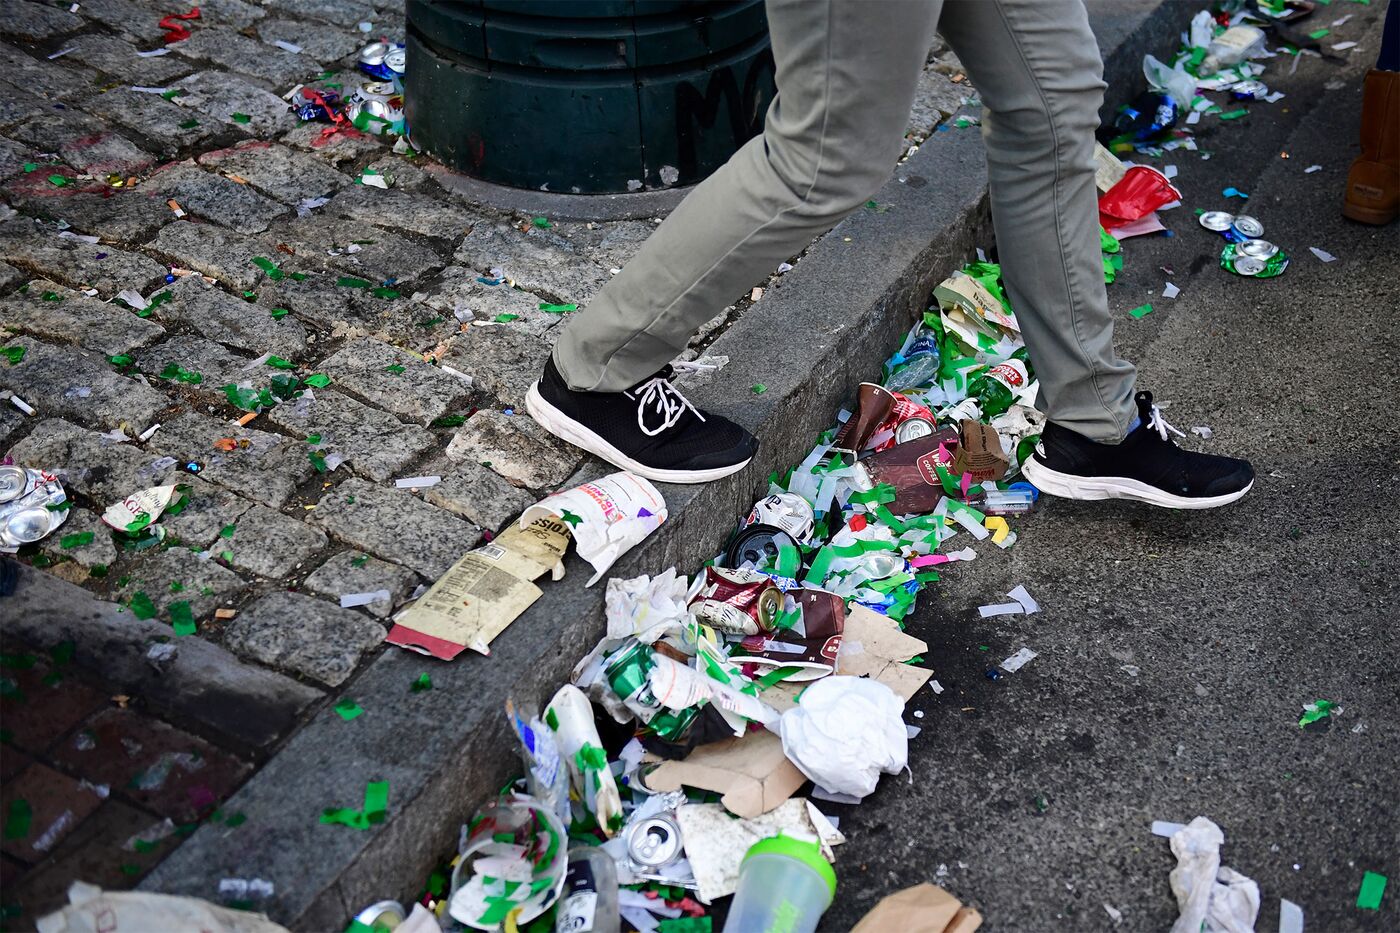 Trash on the street in Philadelphia after the&nbsp;Eagles' Super Bowl LII victory parade in 2018.